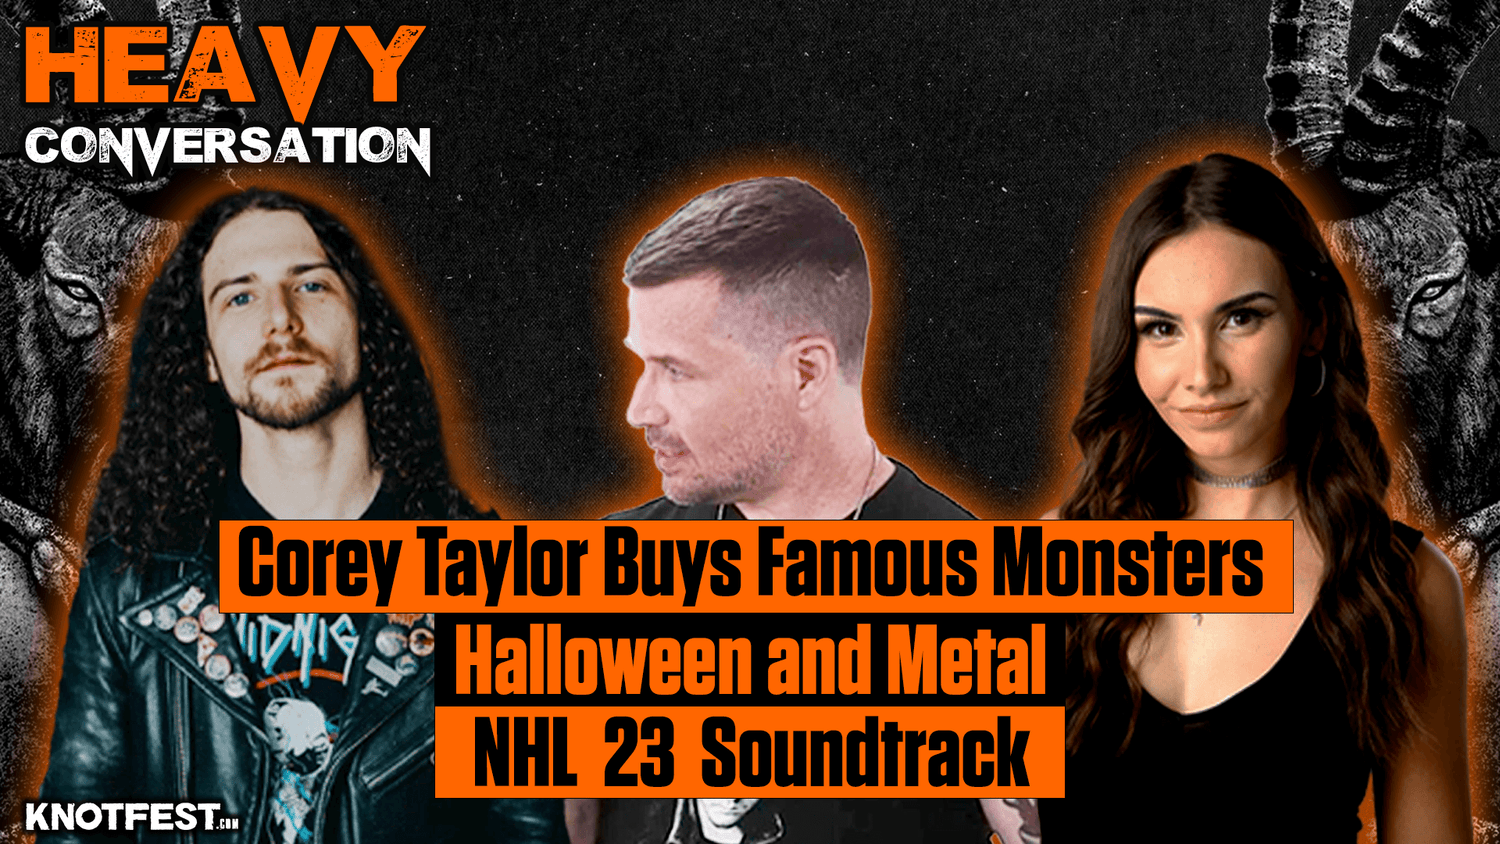 HEAVY CONVERSATION: Corey Taylor Buys Famous Monsters, Halloween & Metal, and the NHL 23 Soundtrack